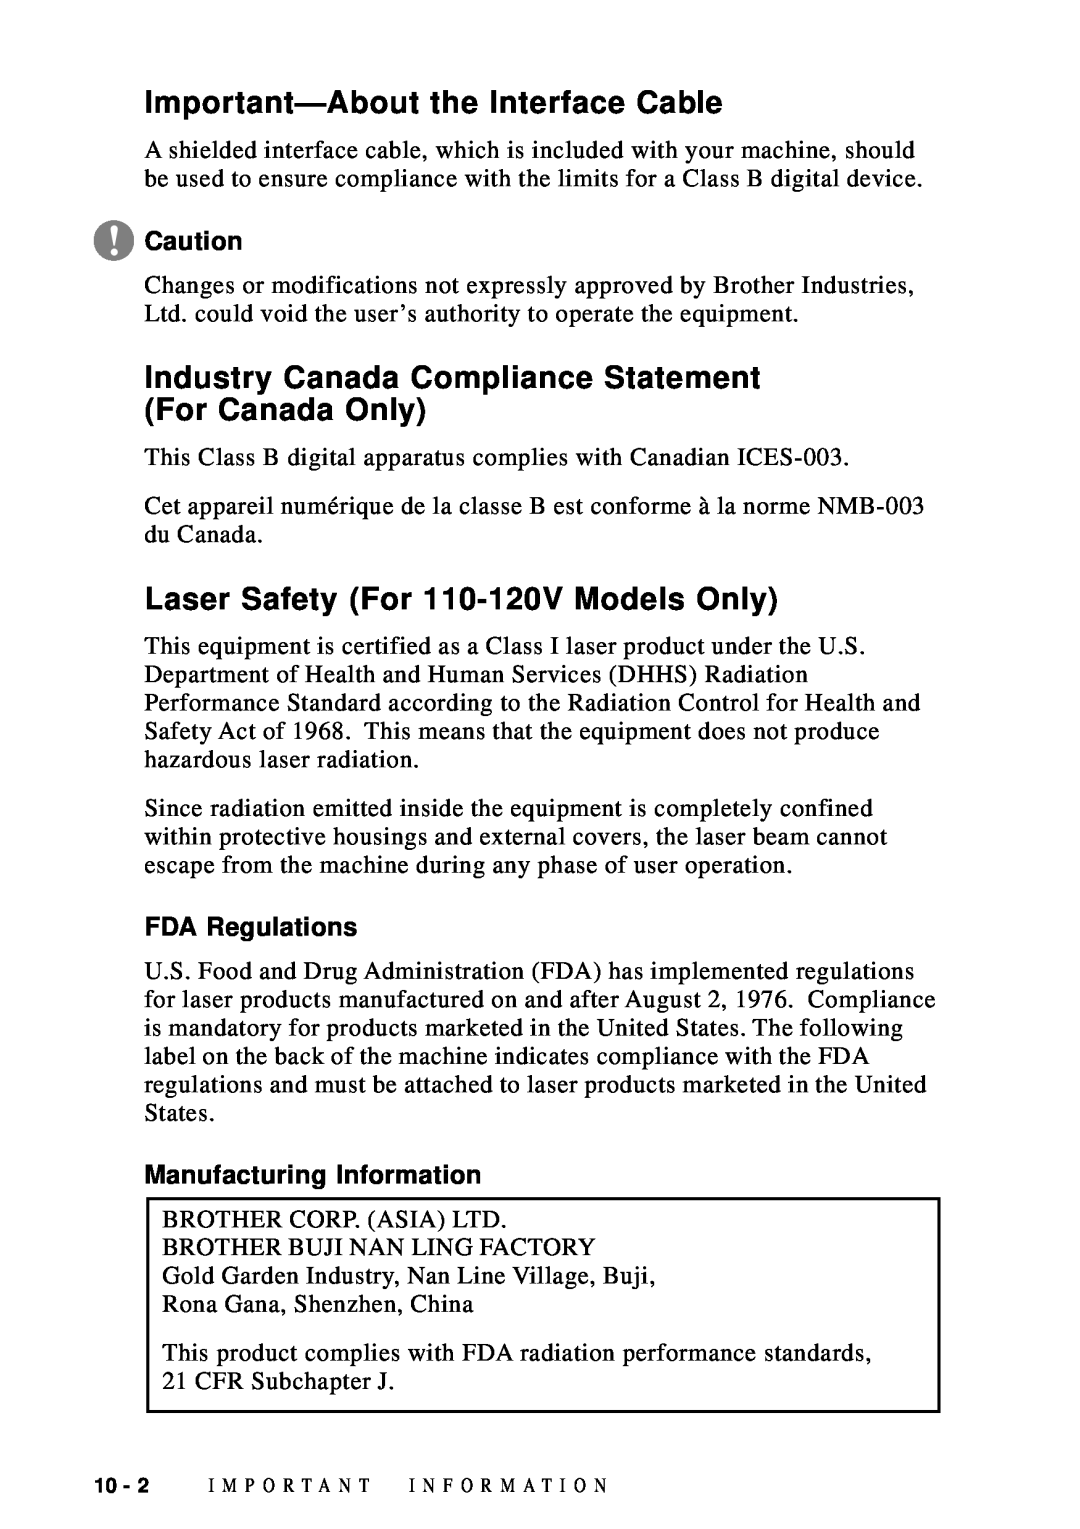 Brother DCP1200 Important-About the Interface Cable, Industry Canada Compliance Statement For Canada Only, FDA Regulations 